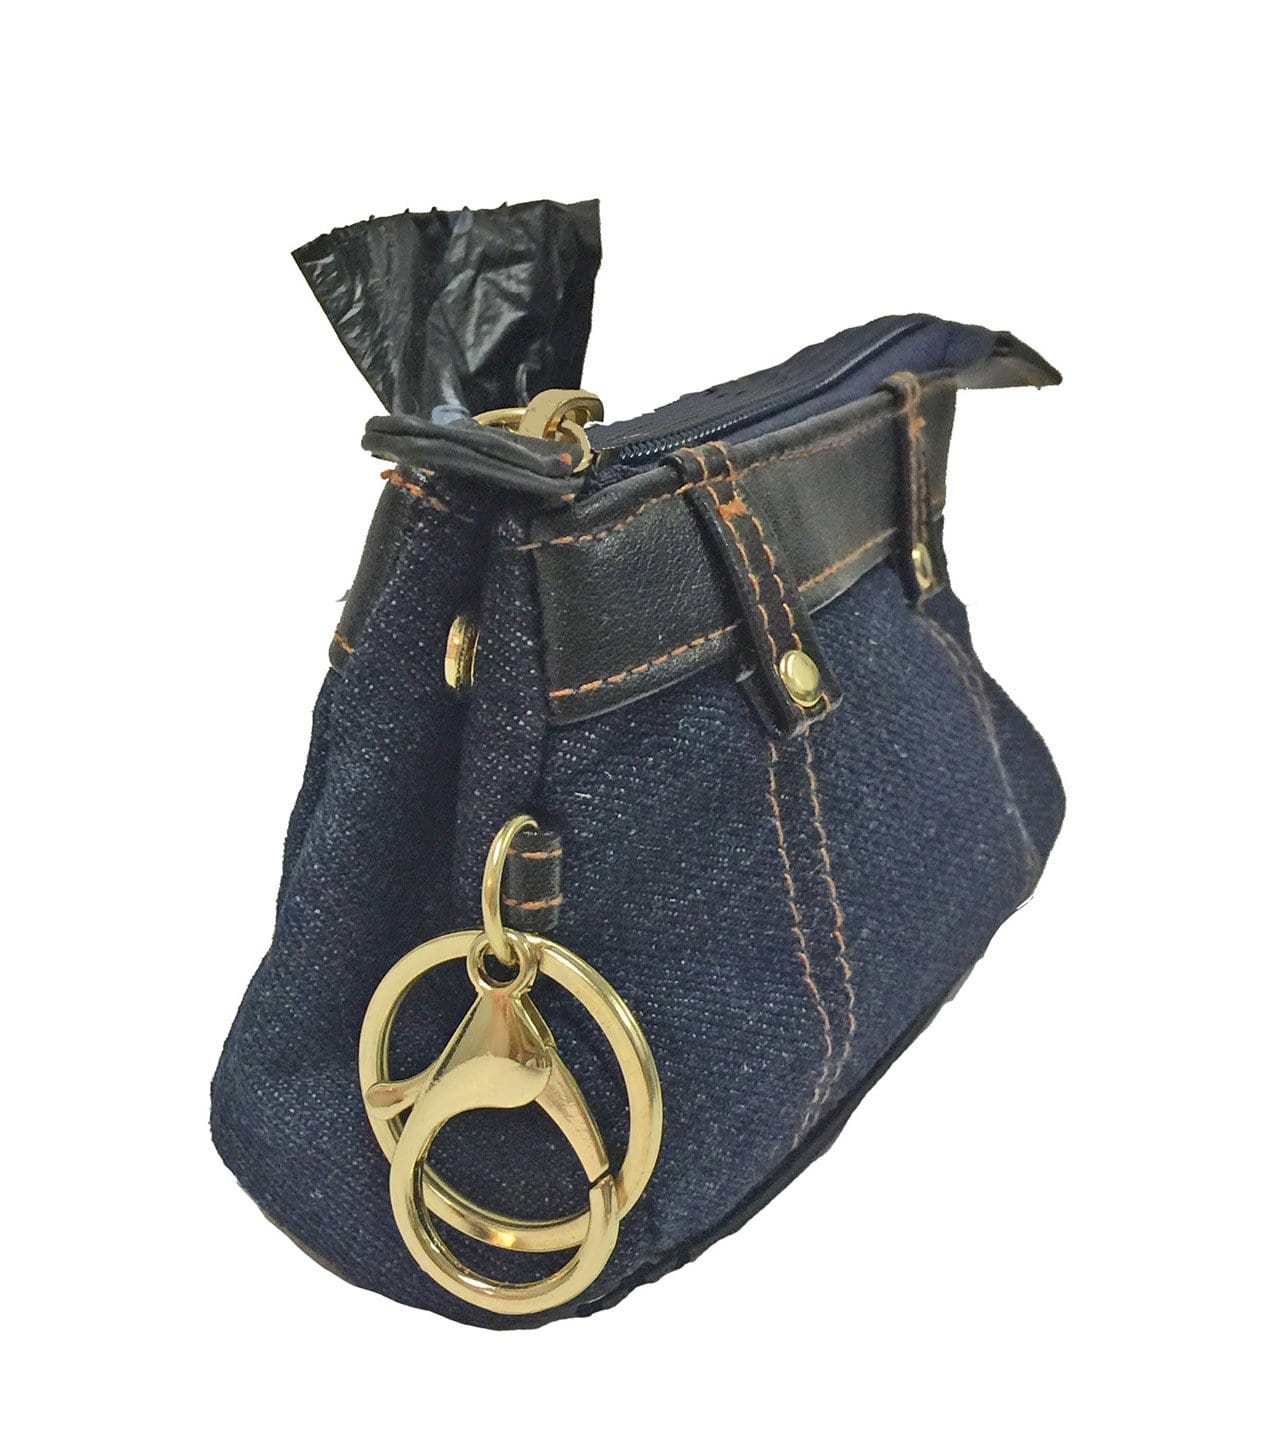 Classy gold clasp on poop bag pouch